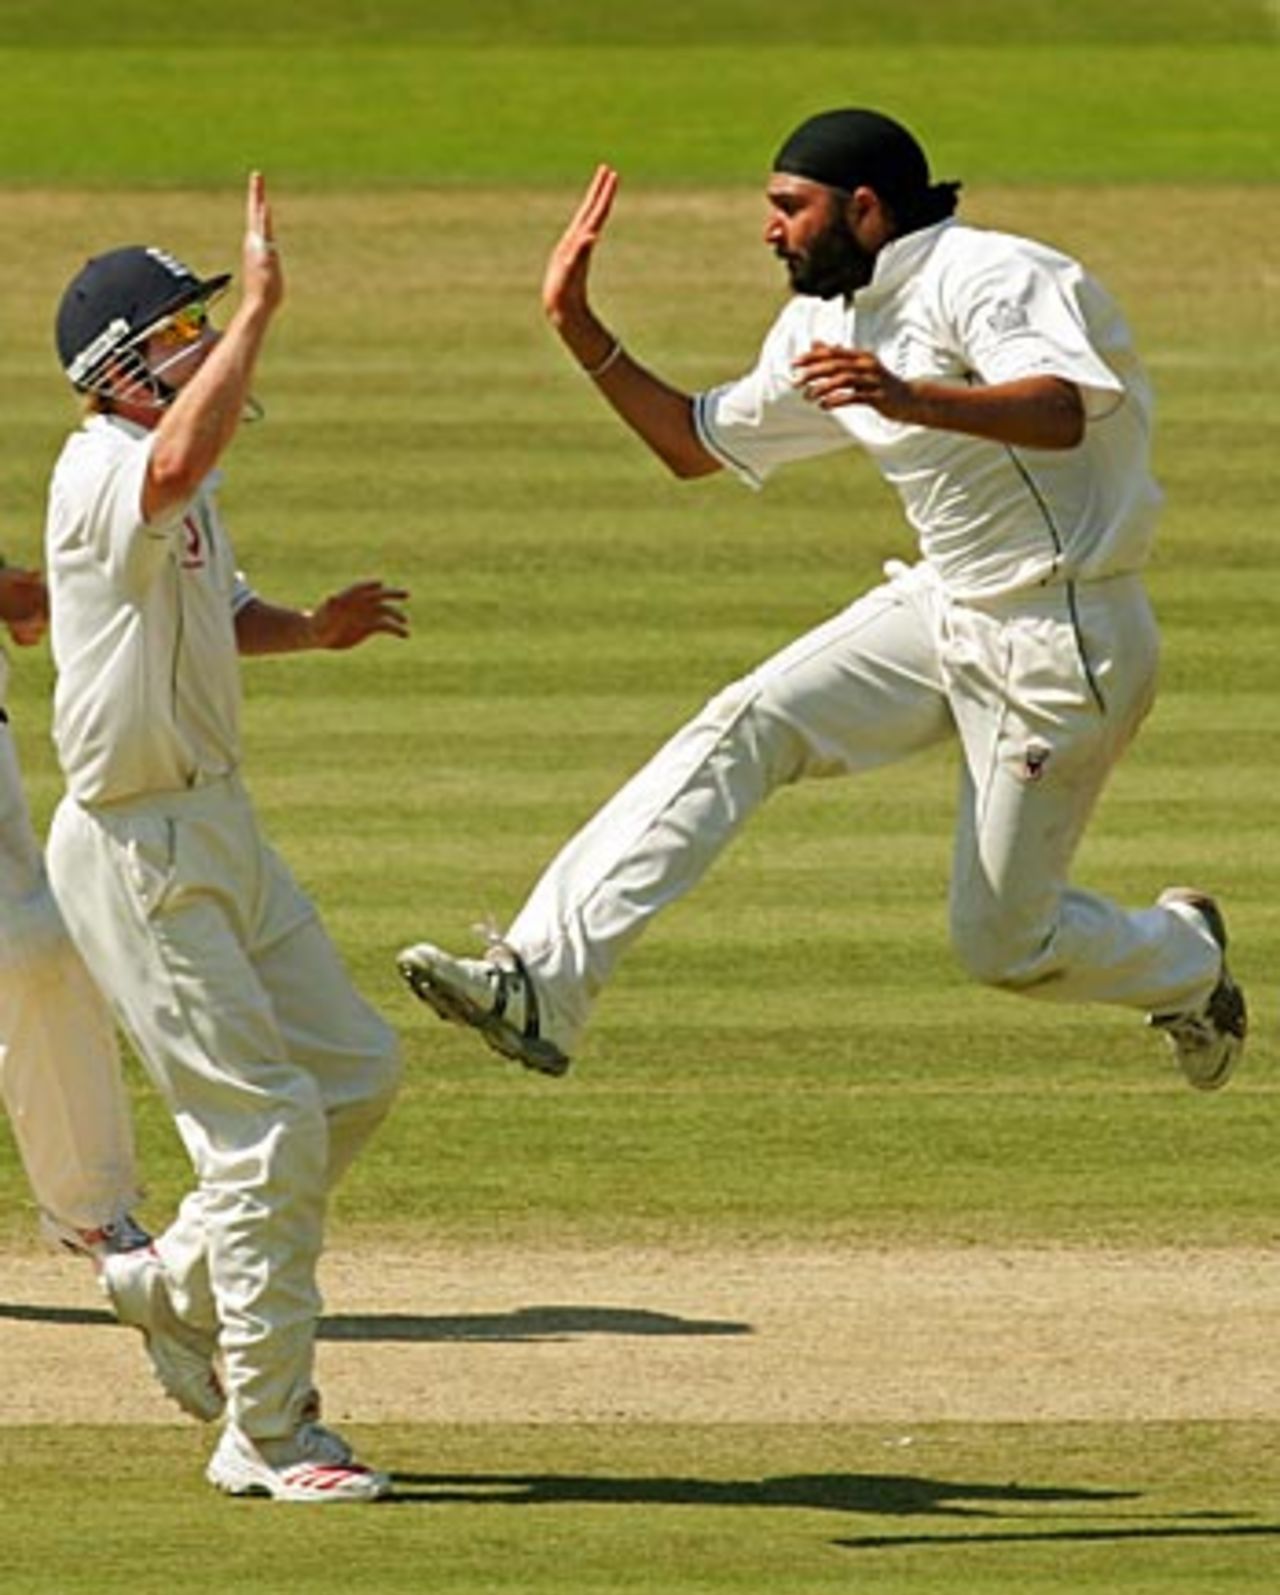 Monty Panesar celebrates the key wicket of Mohammad Yousuf with Paul Collingwood, England v Pakistan, 1st Test, Lord's, July 17, 2006